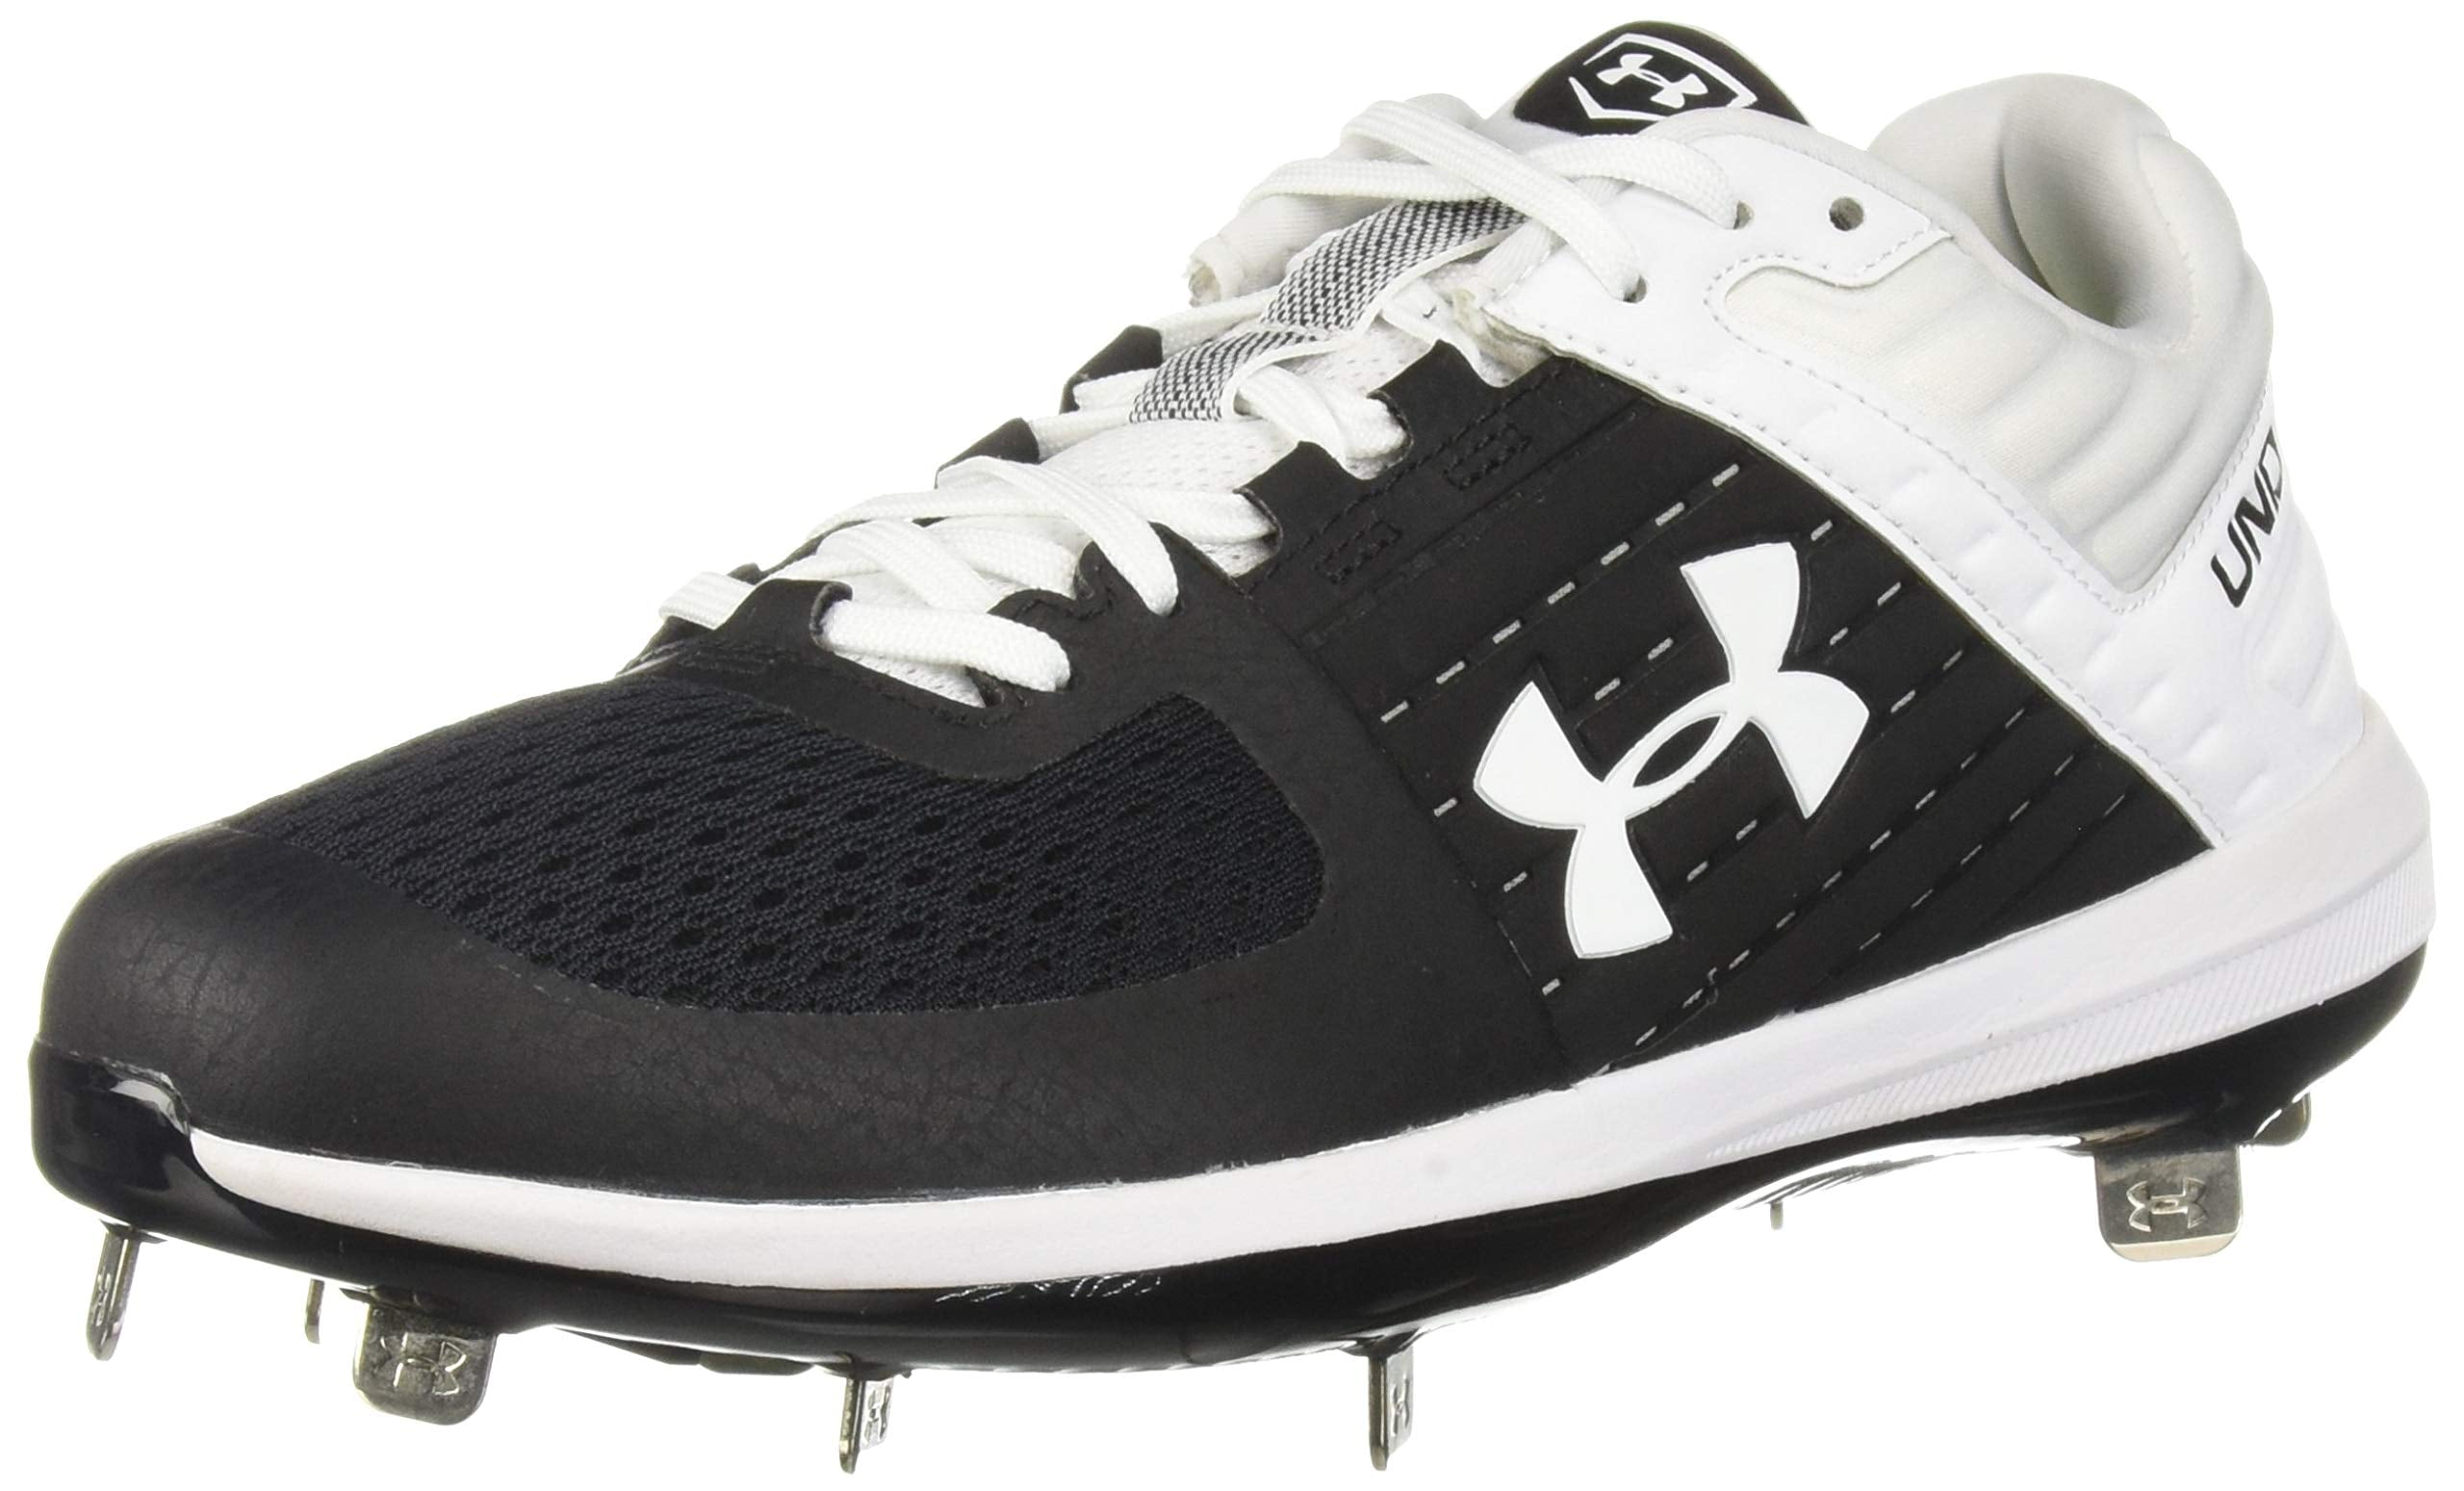 Brand New Under Armour Men's Yard Low ST Metal 10.0 Size Baseball Cleats 